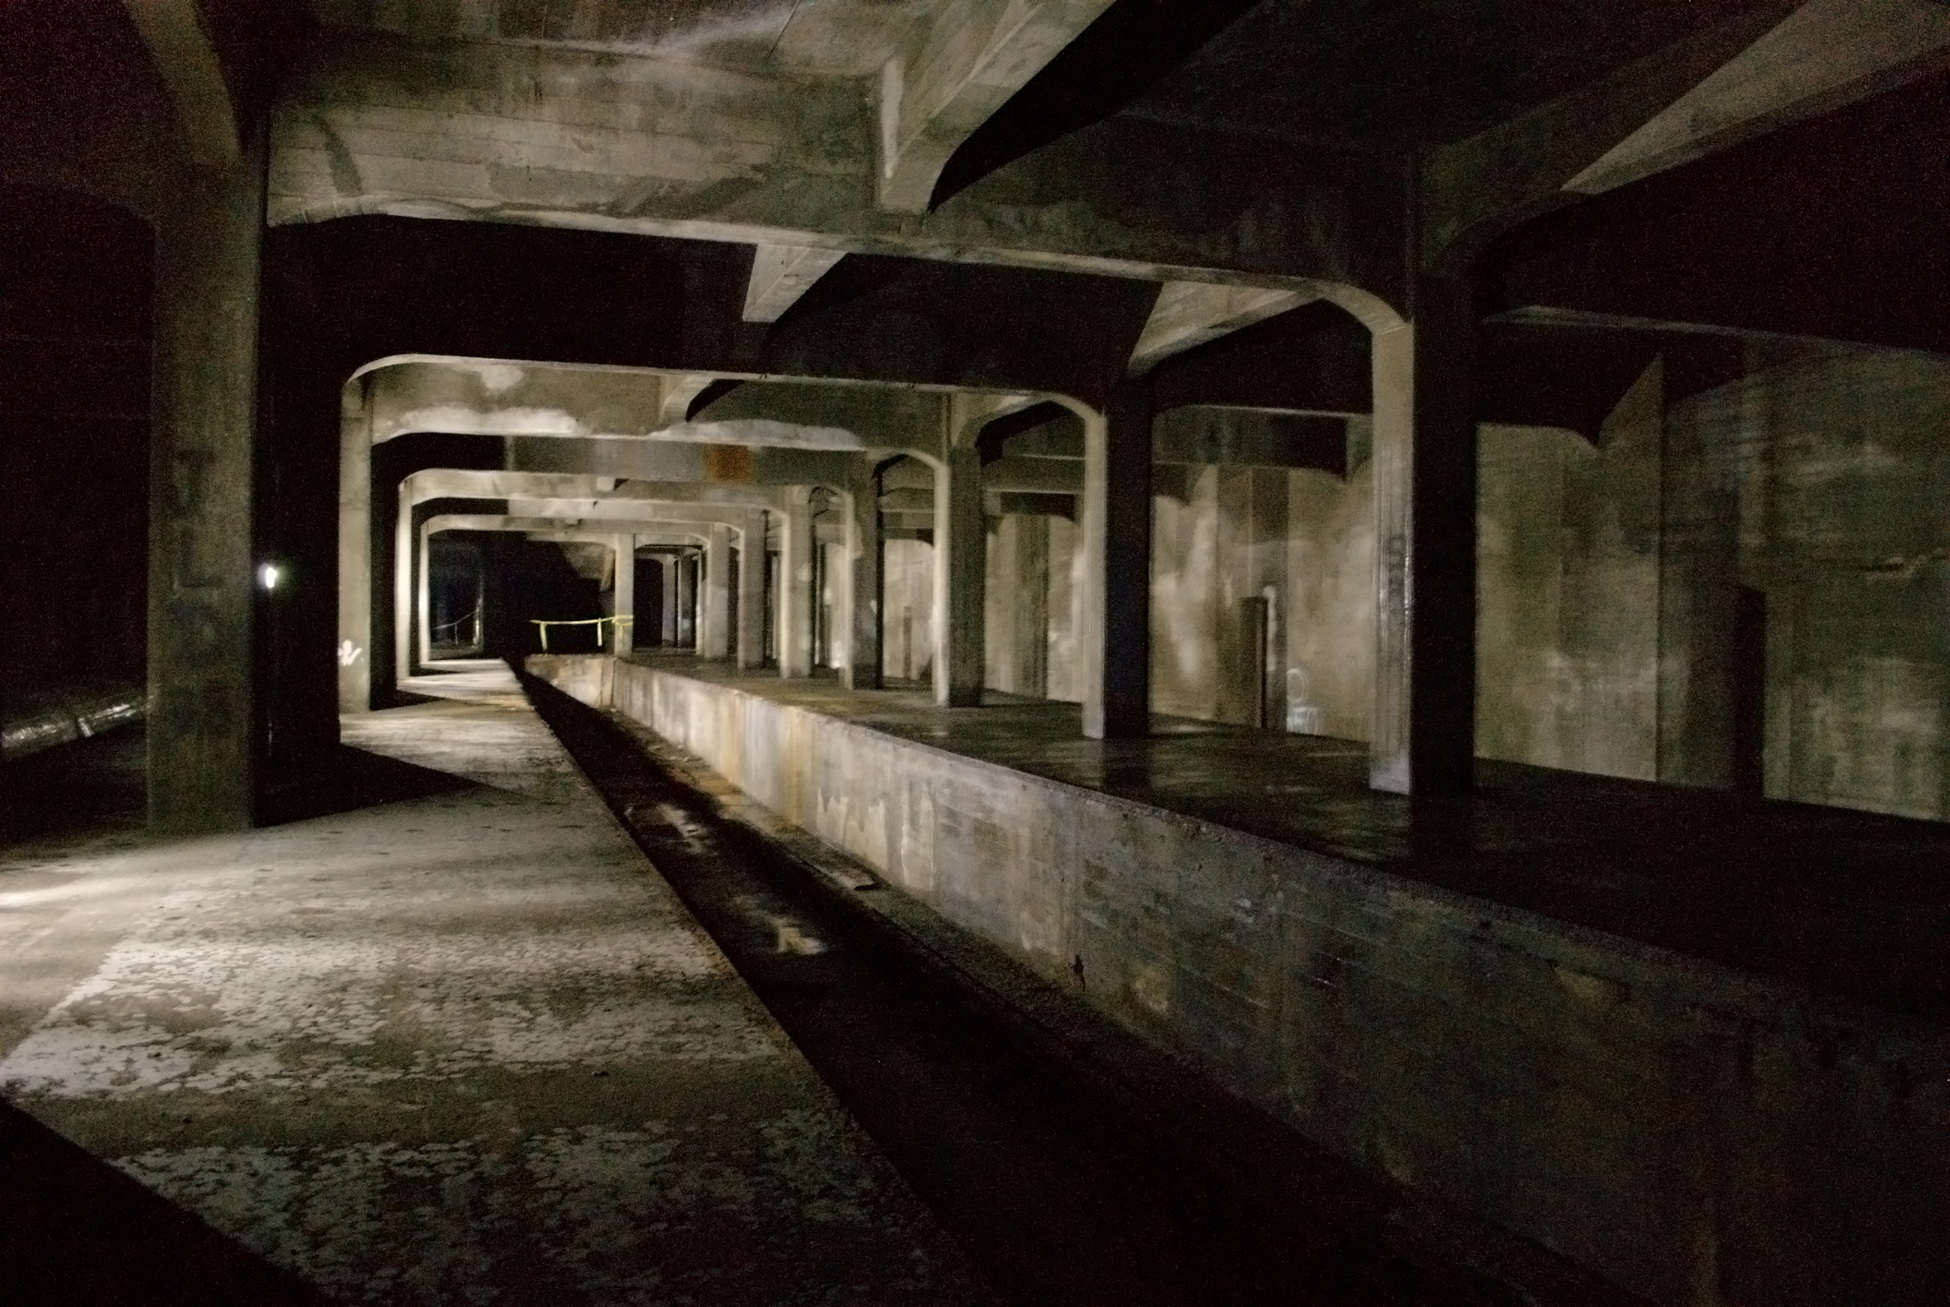 Kenopsia: The eerie, forlorn atmosphere of a place that is usually 

bustling with people but is now abandoned and quiet